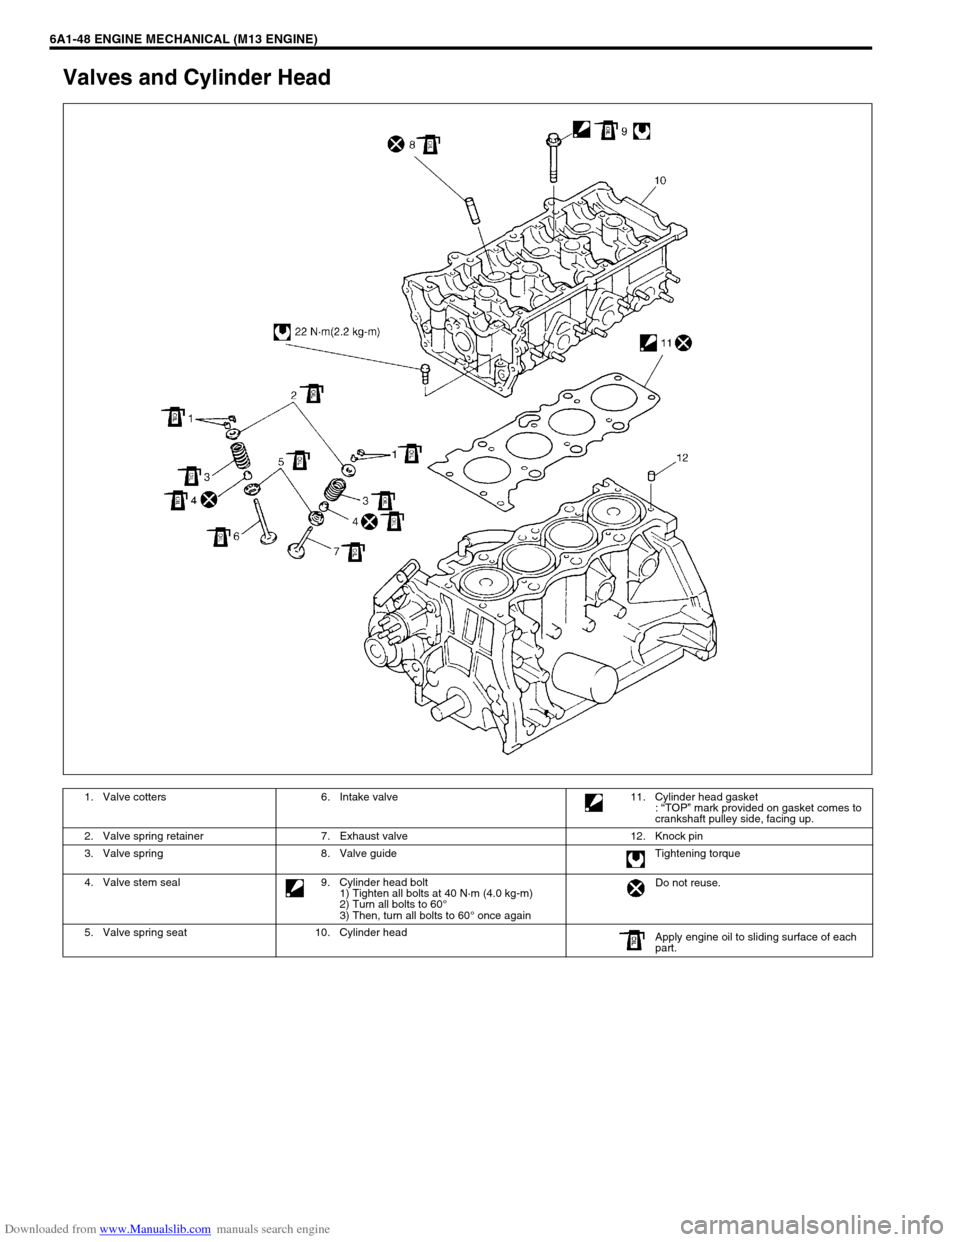 SUZUKI JIMNY 2005 3.G Service Service Manual Downloaded from www.Manualslib.com manuals search engine 6A1-48 ENGINE MECHANICAL (M13 ENGINE)
Valves and Cylinder Head
1. Valve cotters 6. Intake valve 11. Cylinder head gasket
: “TOP” mark provi